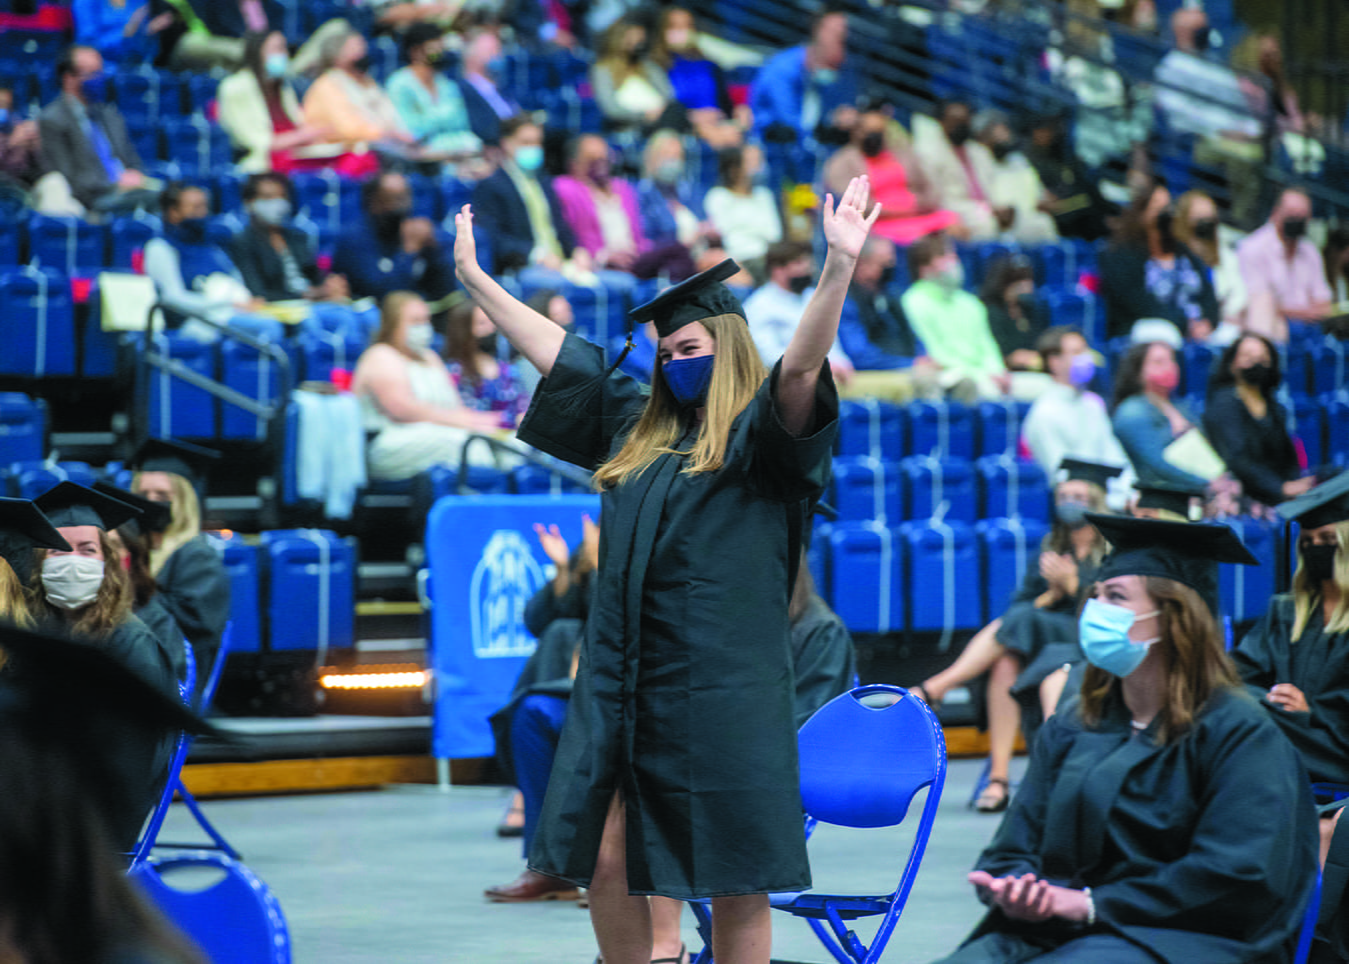 Graduation in Curb Event Center at Belmont University in Nashville, Tennessee, April 23, 2021.